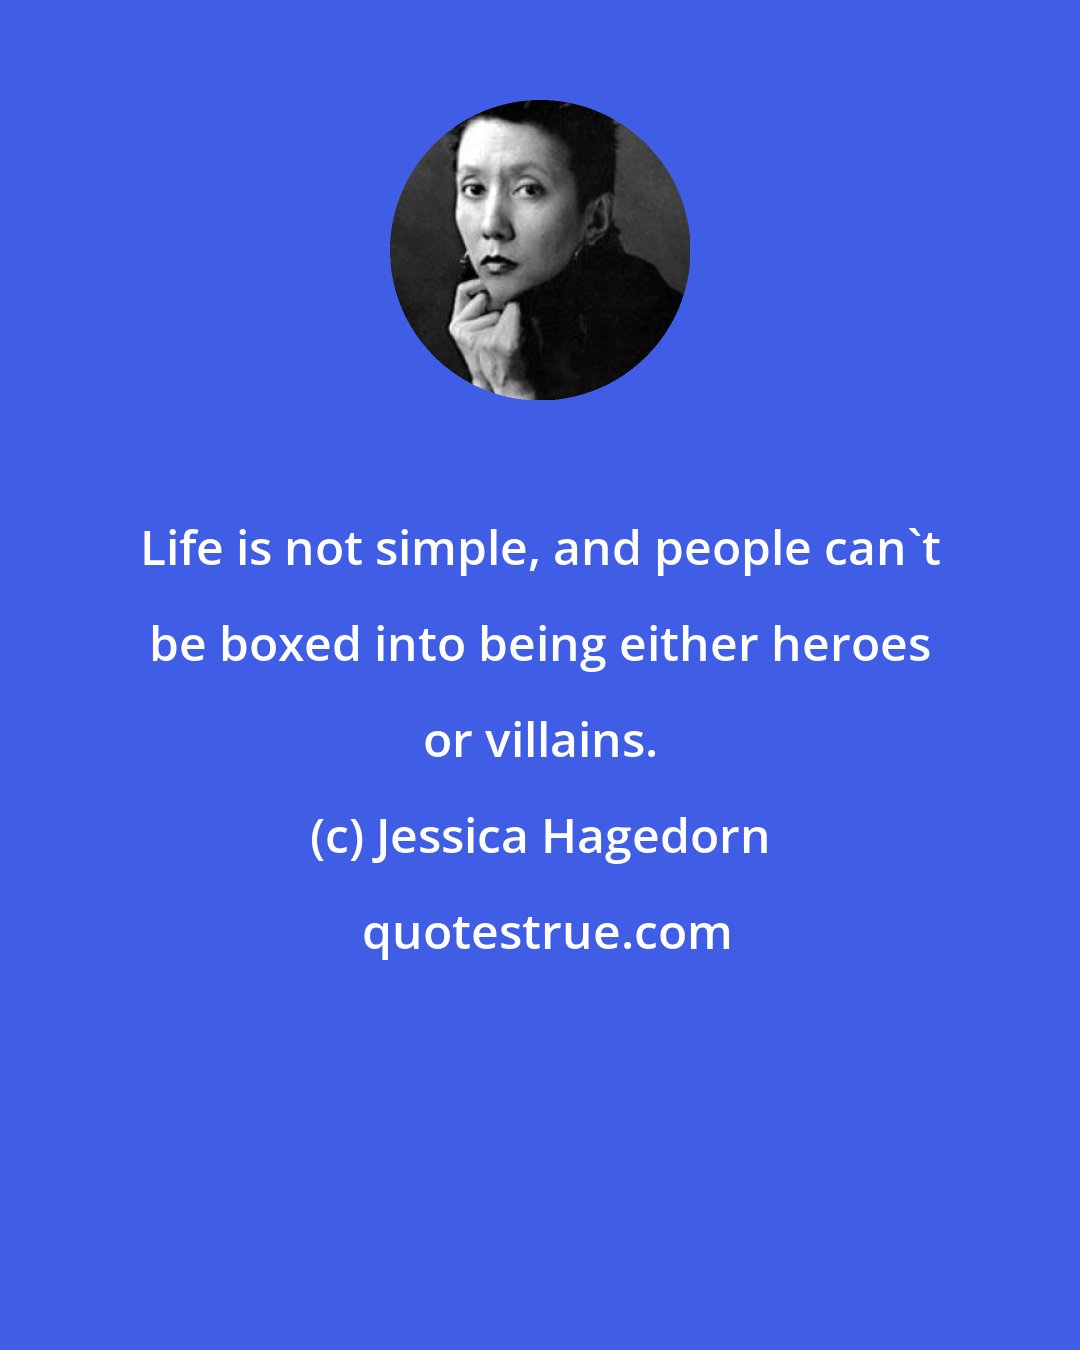 Jessica Hagedorn: Life is not simple, and people can't be boxed into being either heroes or villains.